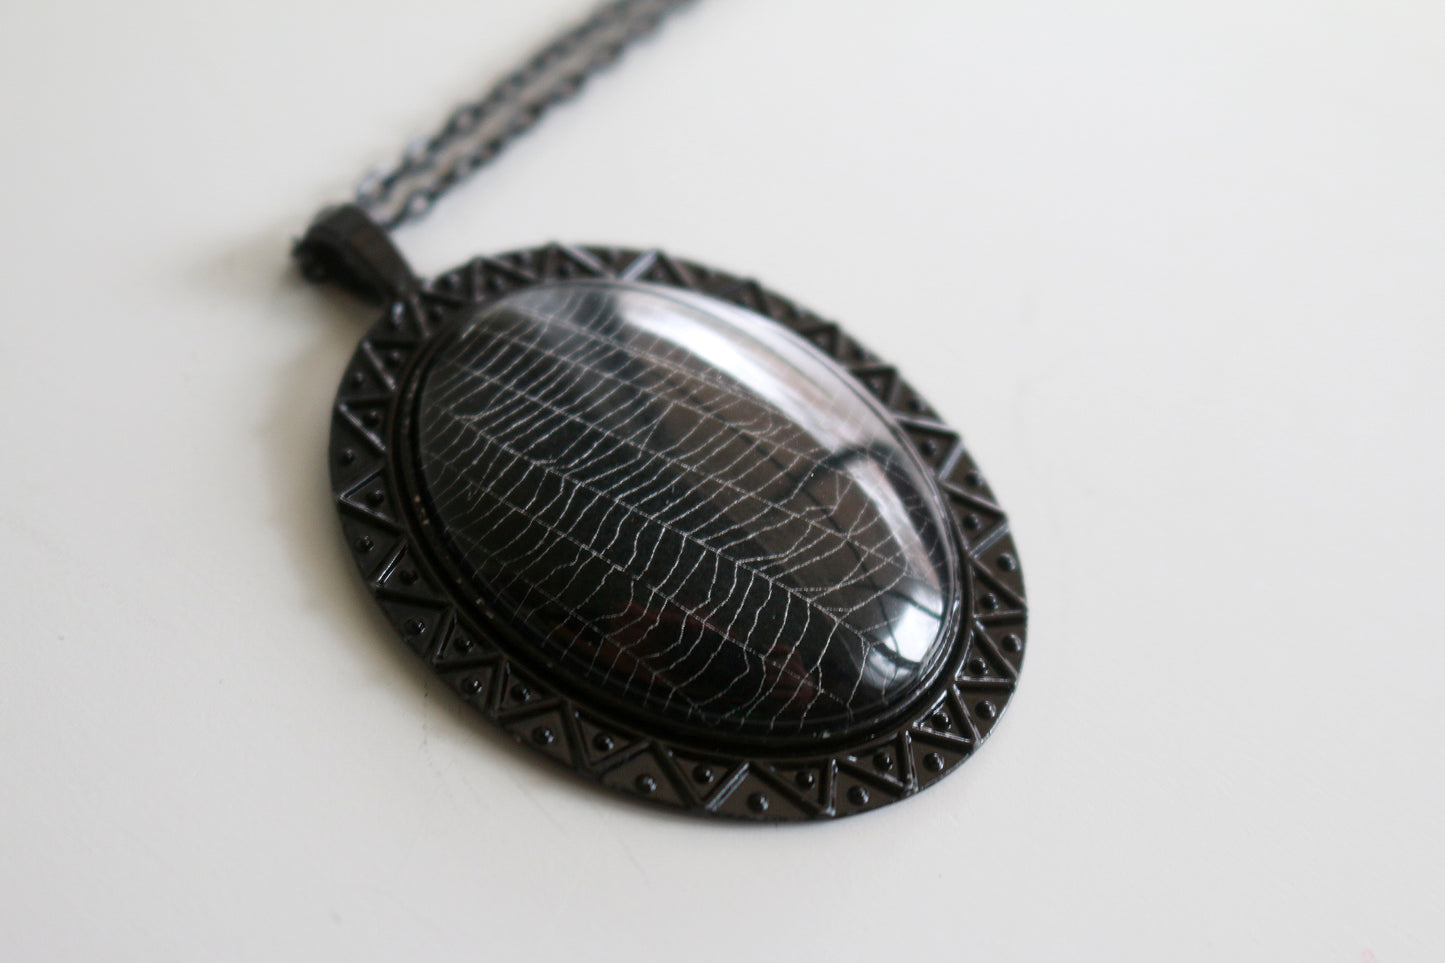 Real Spider Web Cabochon Necklace